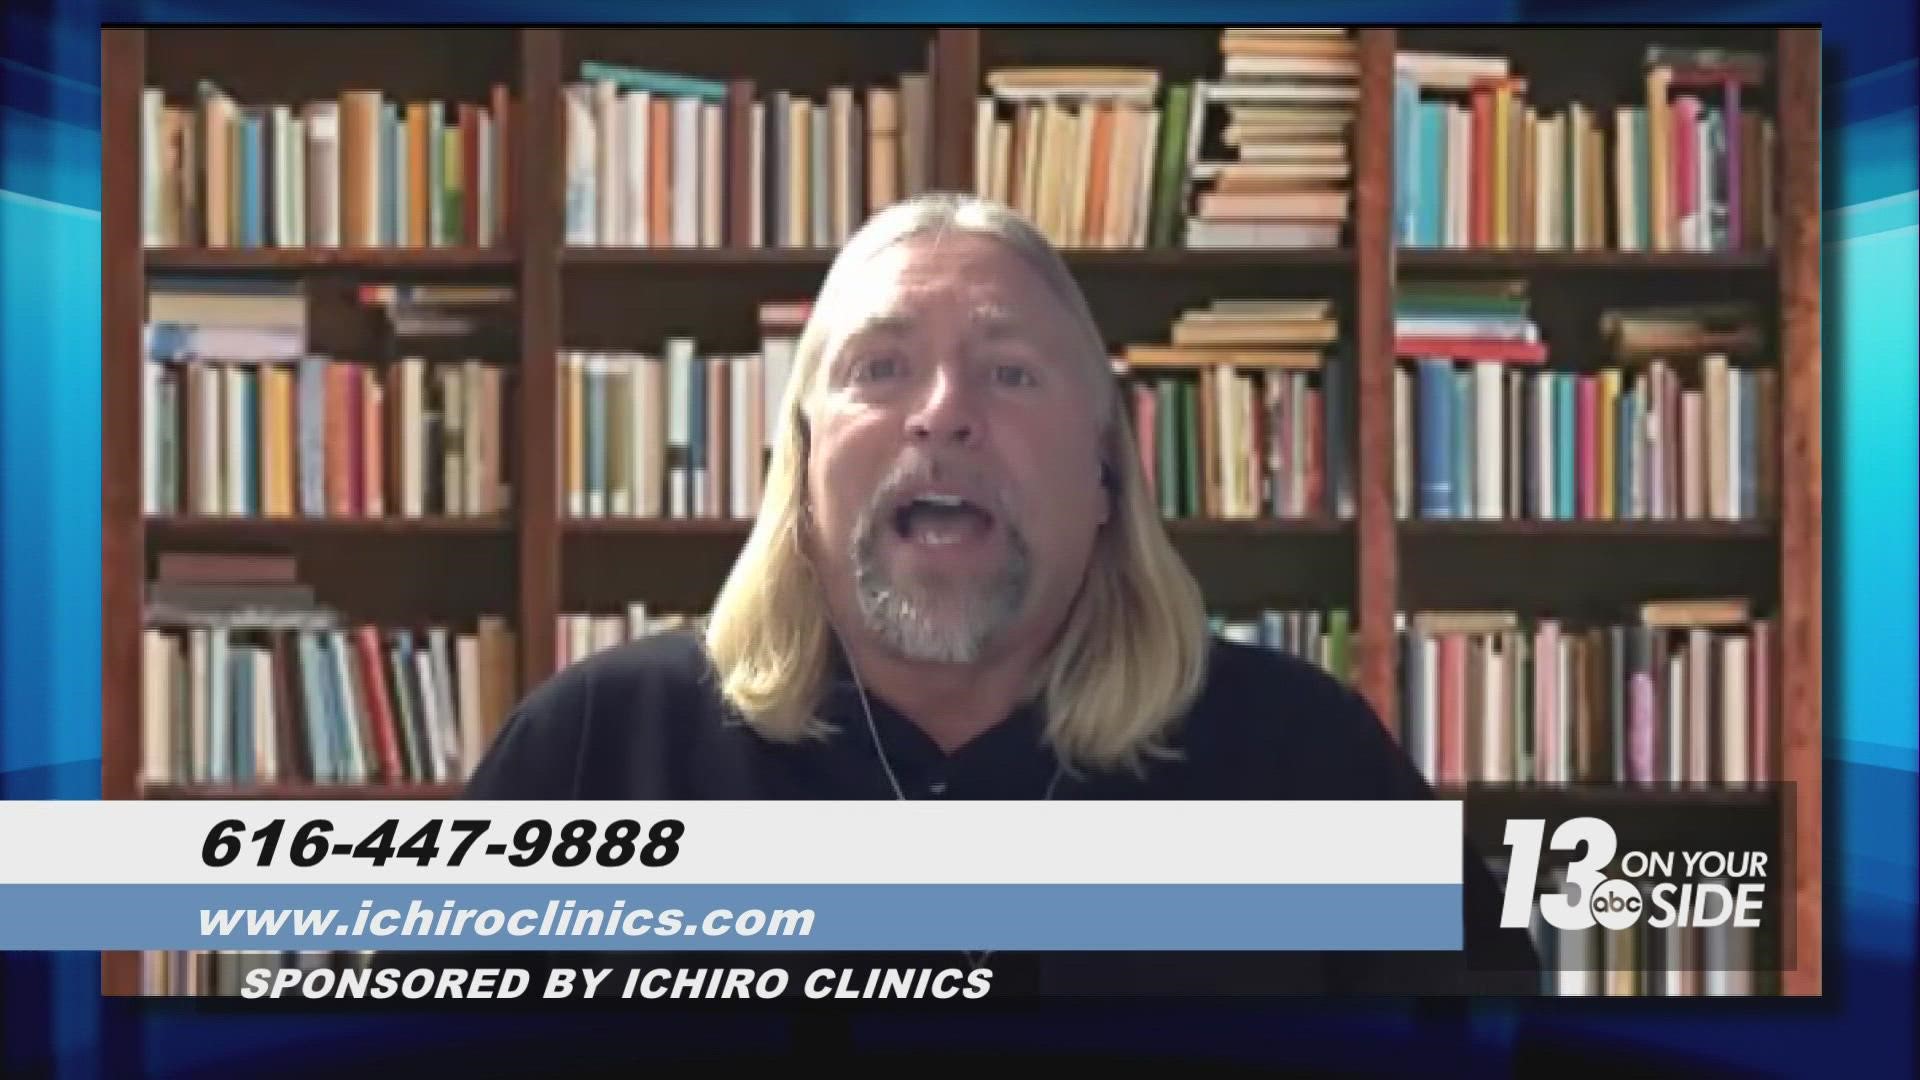 Dr. Michael Kwast, from iChiro Clinics shares the story of a woman who doesn’t like chiropractic care because she tried it once and did not like the experience.